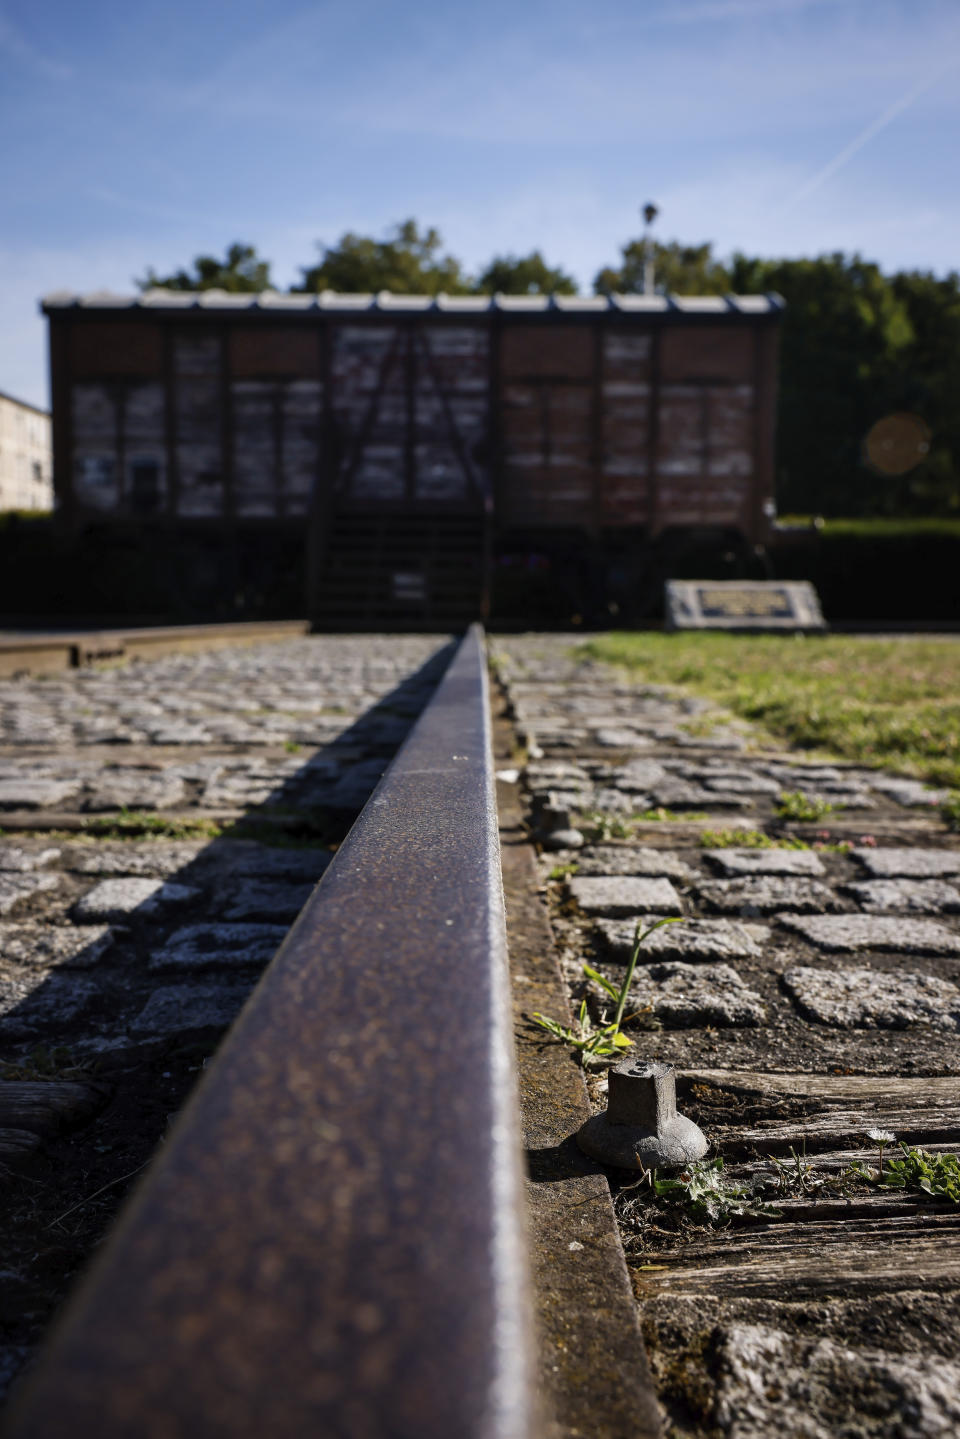 A train car symbolizing the Drancy camp, at the Shoah memorial is photographed Tuesday, July 12, 2022 in Drancy, outside Paris. The Paris mayor and head of the French Holocaust Memorial will mark the 80th anniversary of the round-up of the Vel d'Hiv, the biggest Nazi roundup of Jews in France, visiting the site used as an internment camp during World War II for tens of thousands of people who were then sent on to Auschwitz and other death camps. (AP Photo/Thomas Padilla)